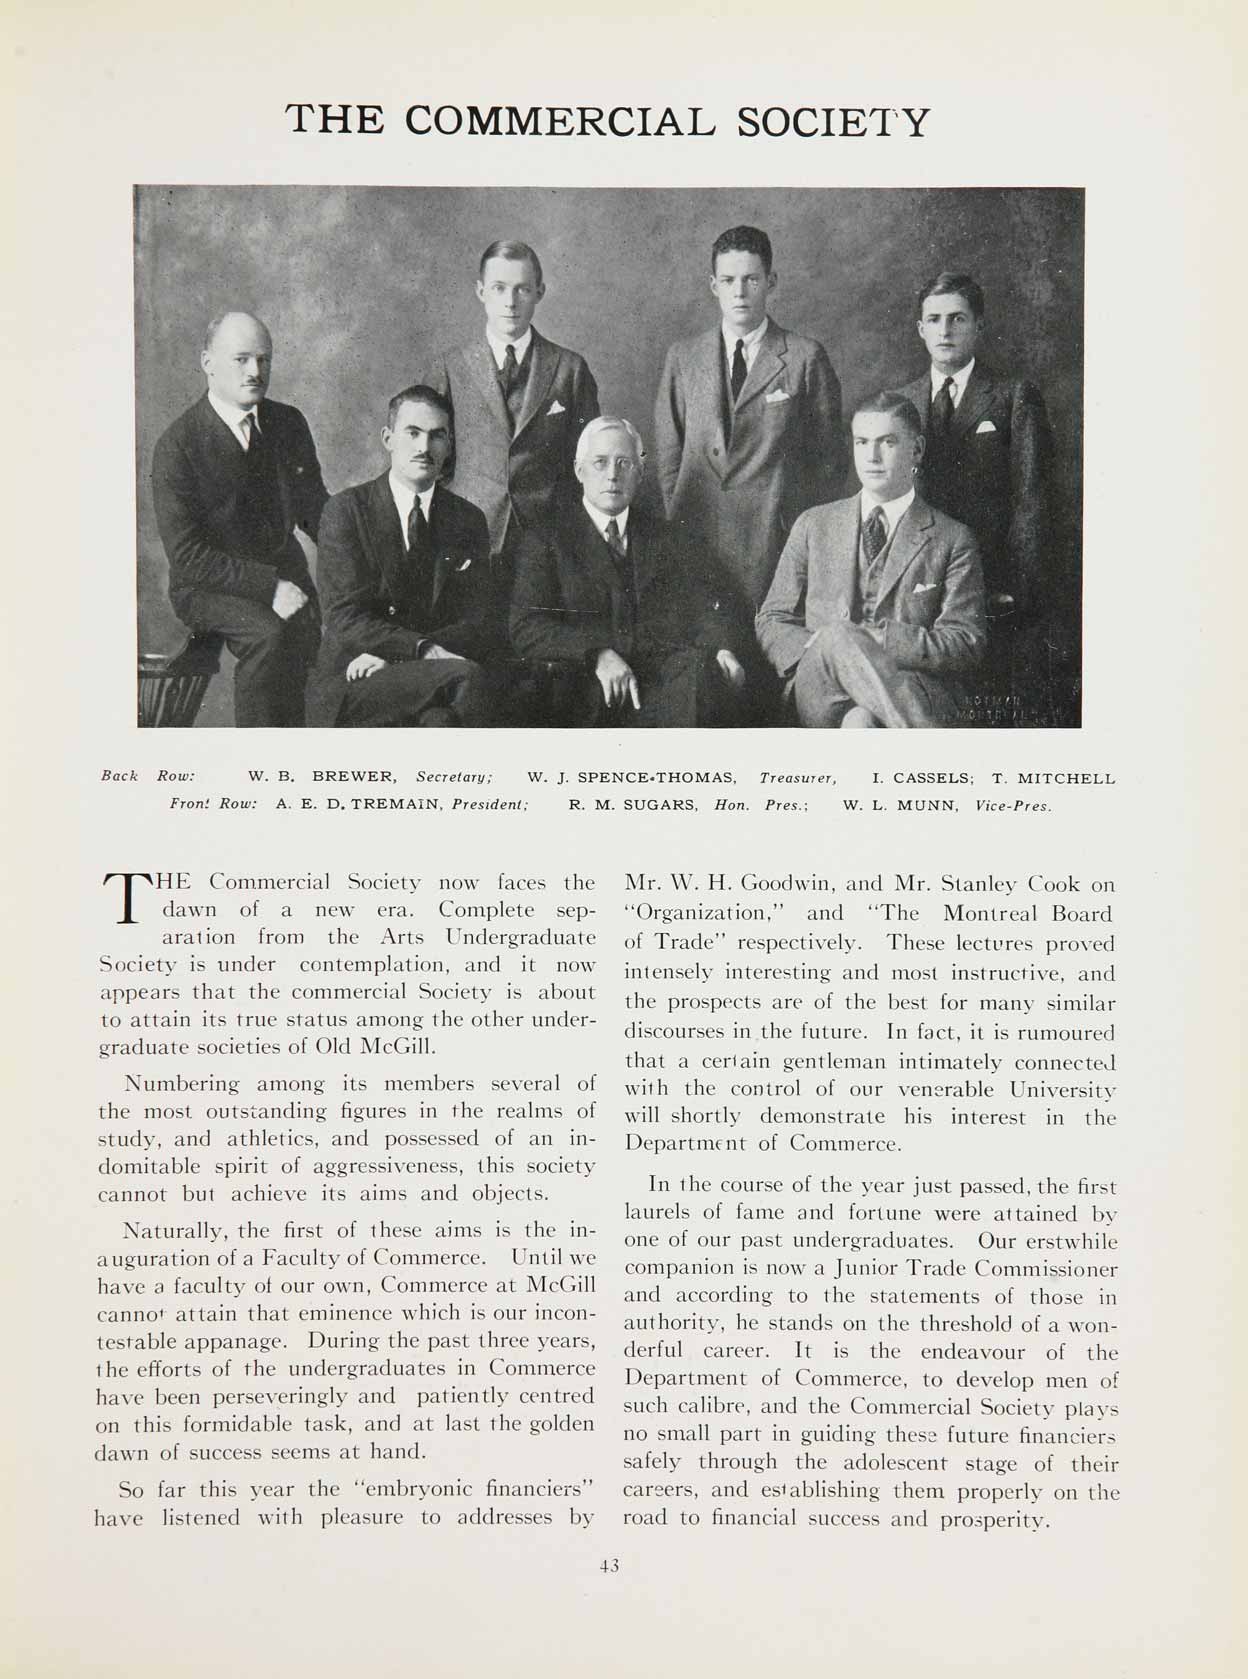 McGill Yearbook: 1924